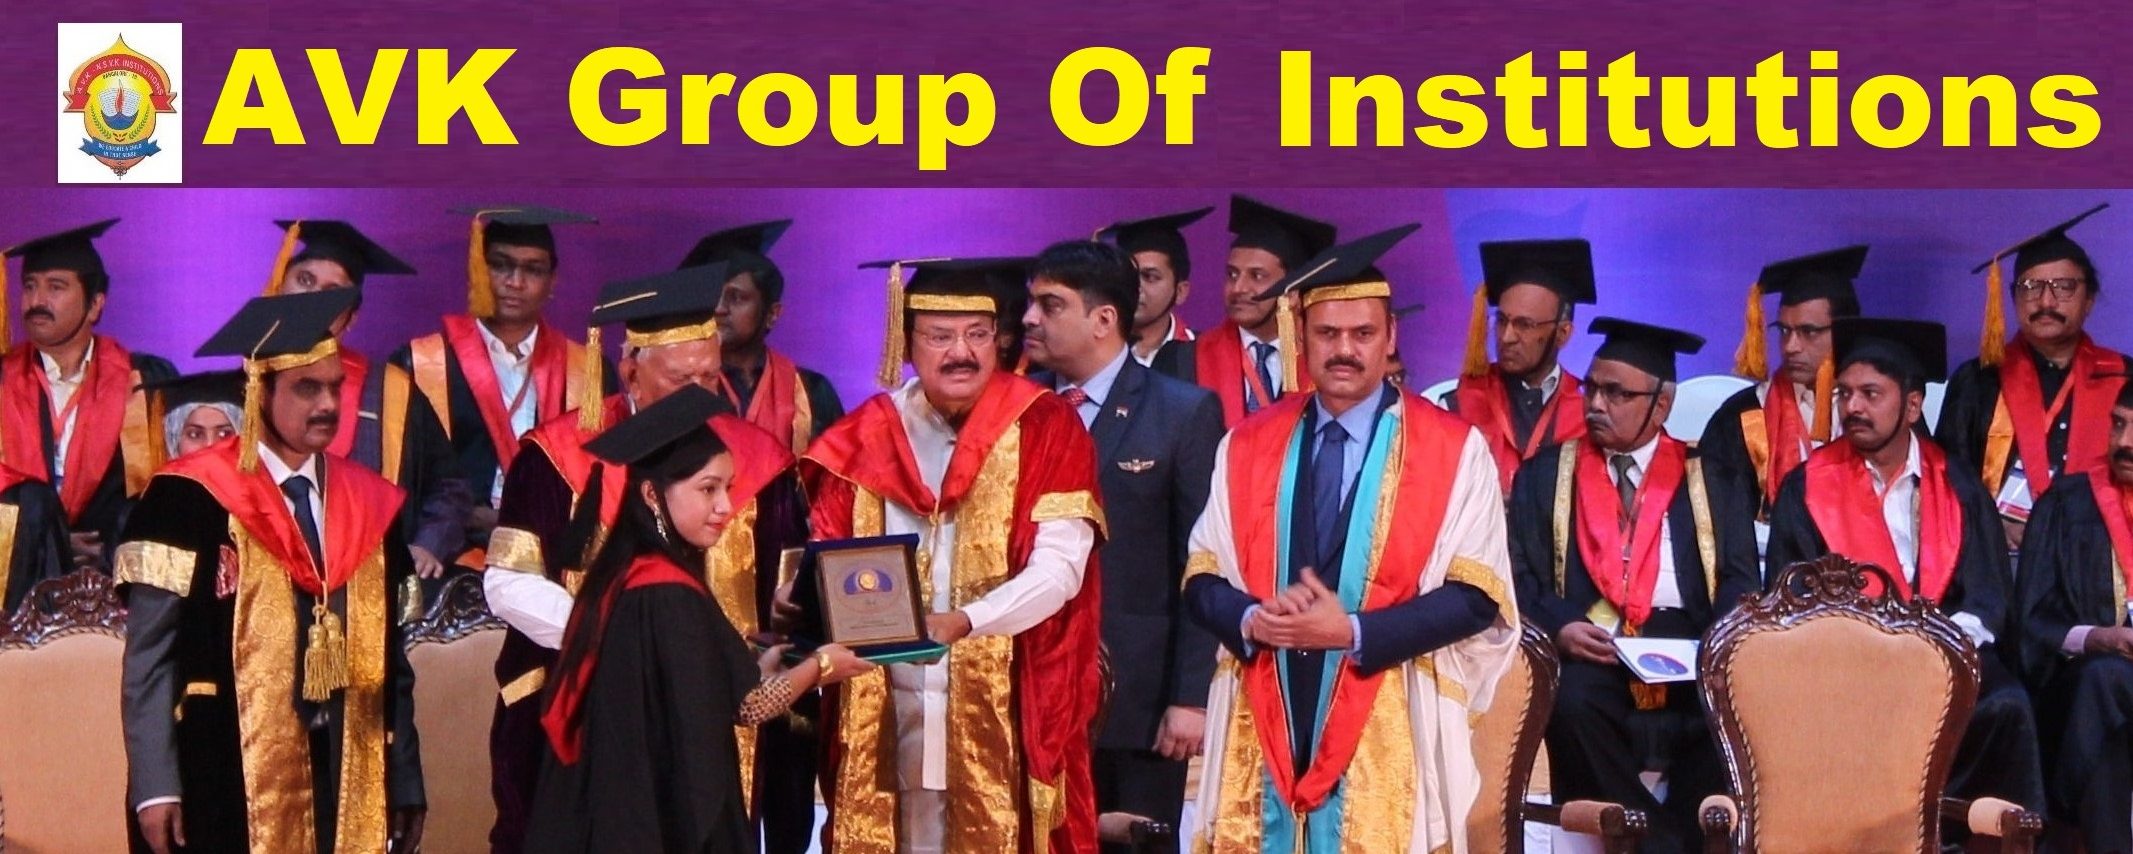 AVK GROUP OF INSTITUTIONS